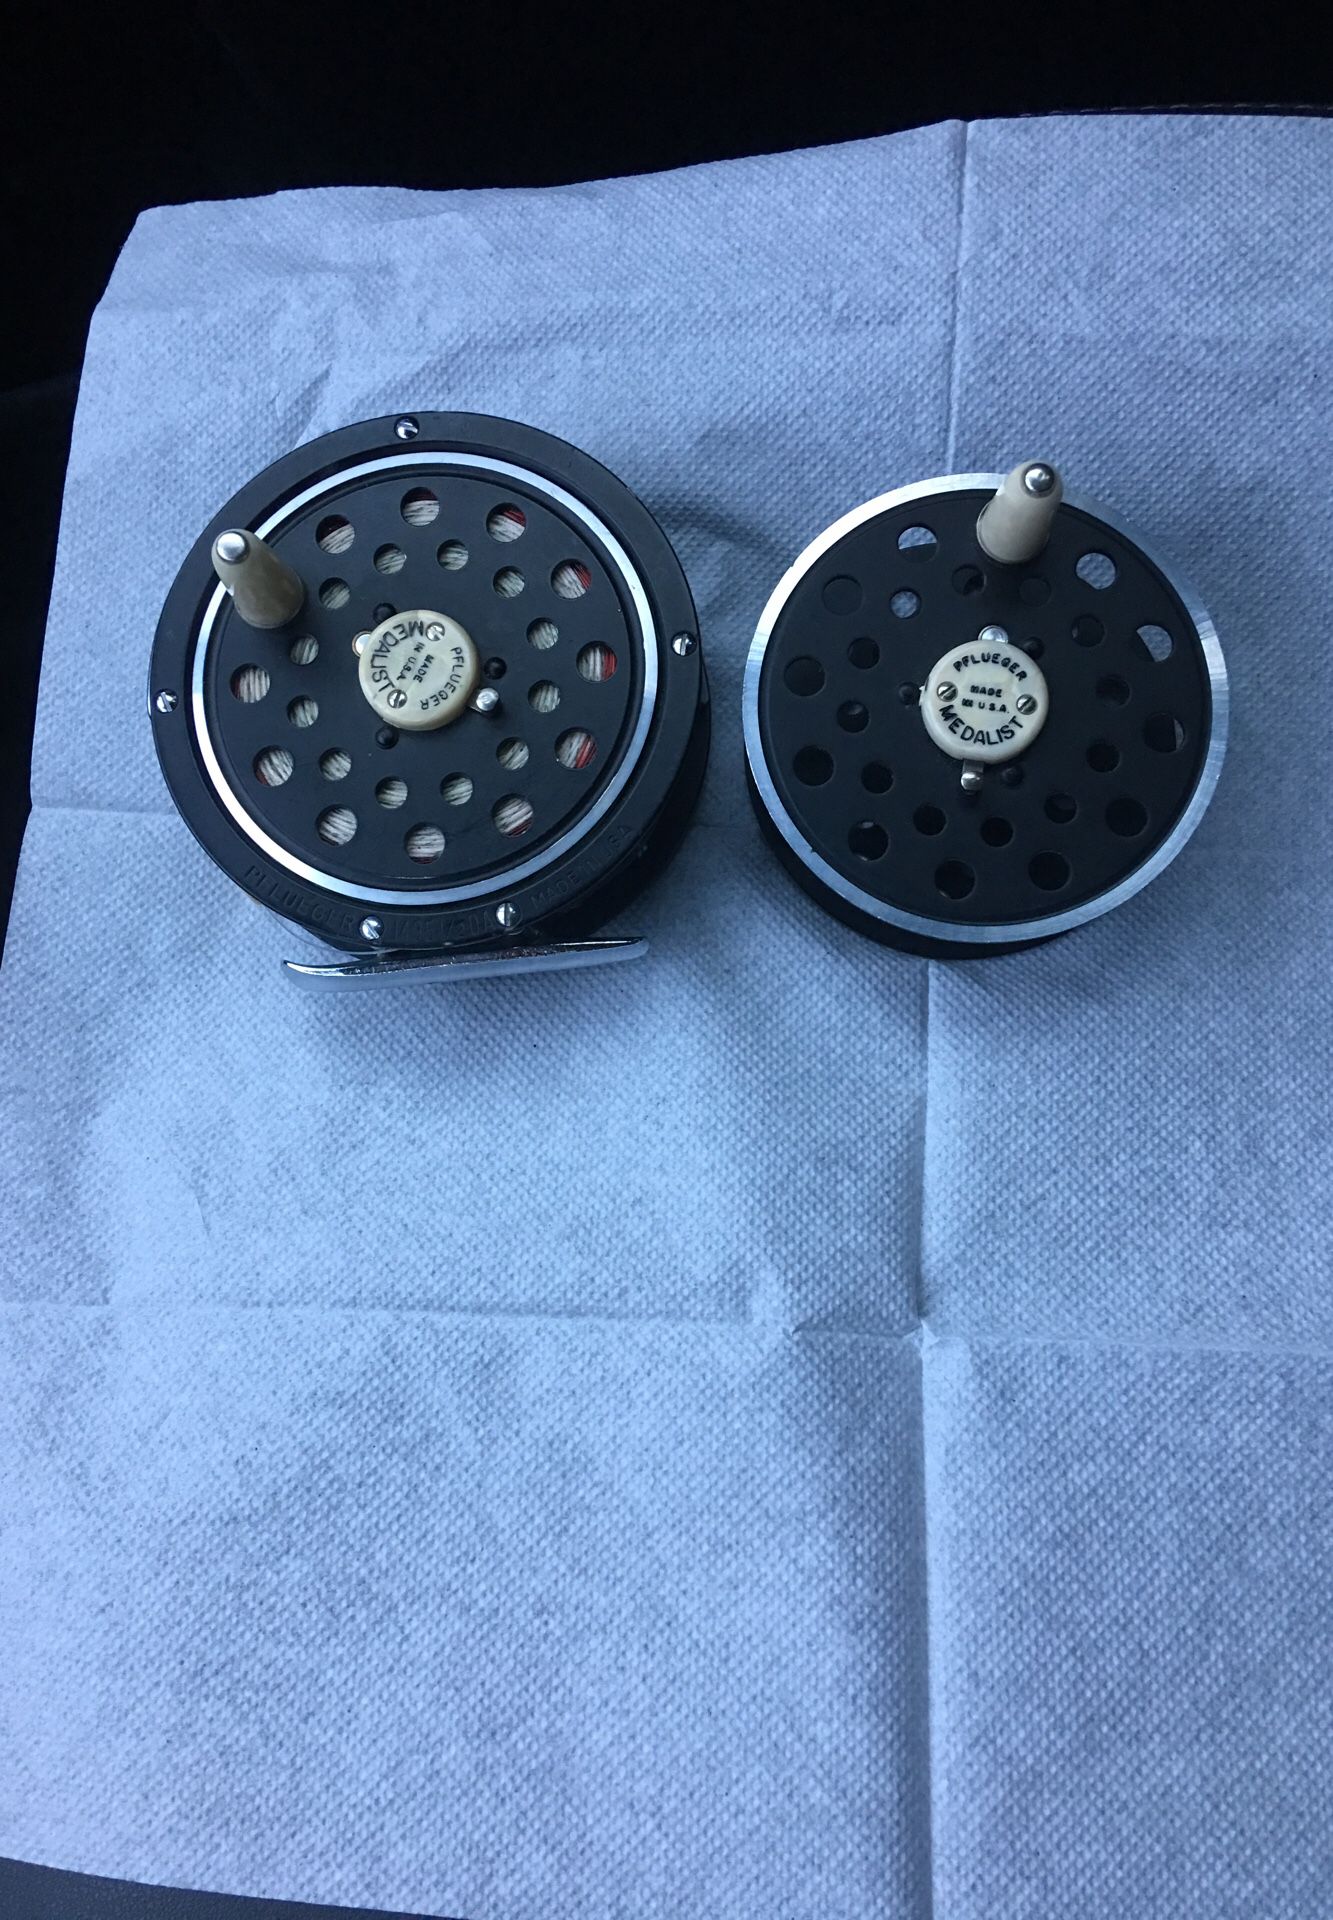 World Wide Sportsman Gold Cup IV 10-12wt fly reel (with sinking line) for  Sale in San Diego, CA - OfferUp